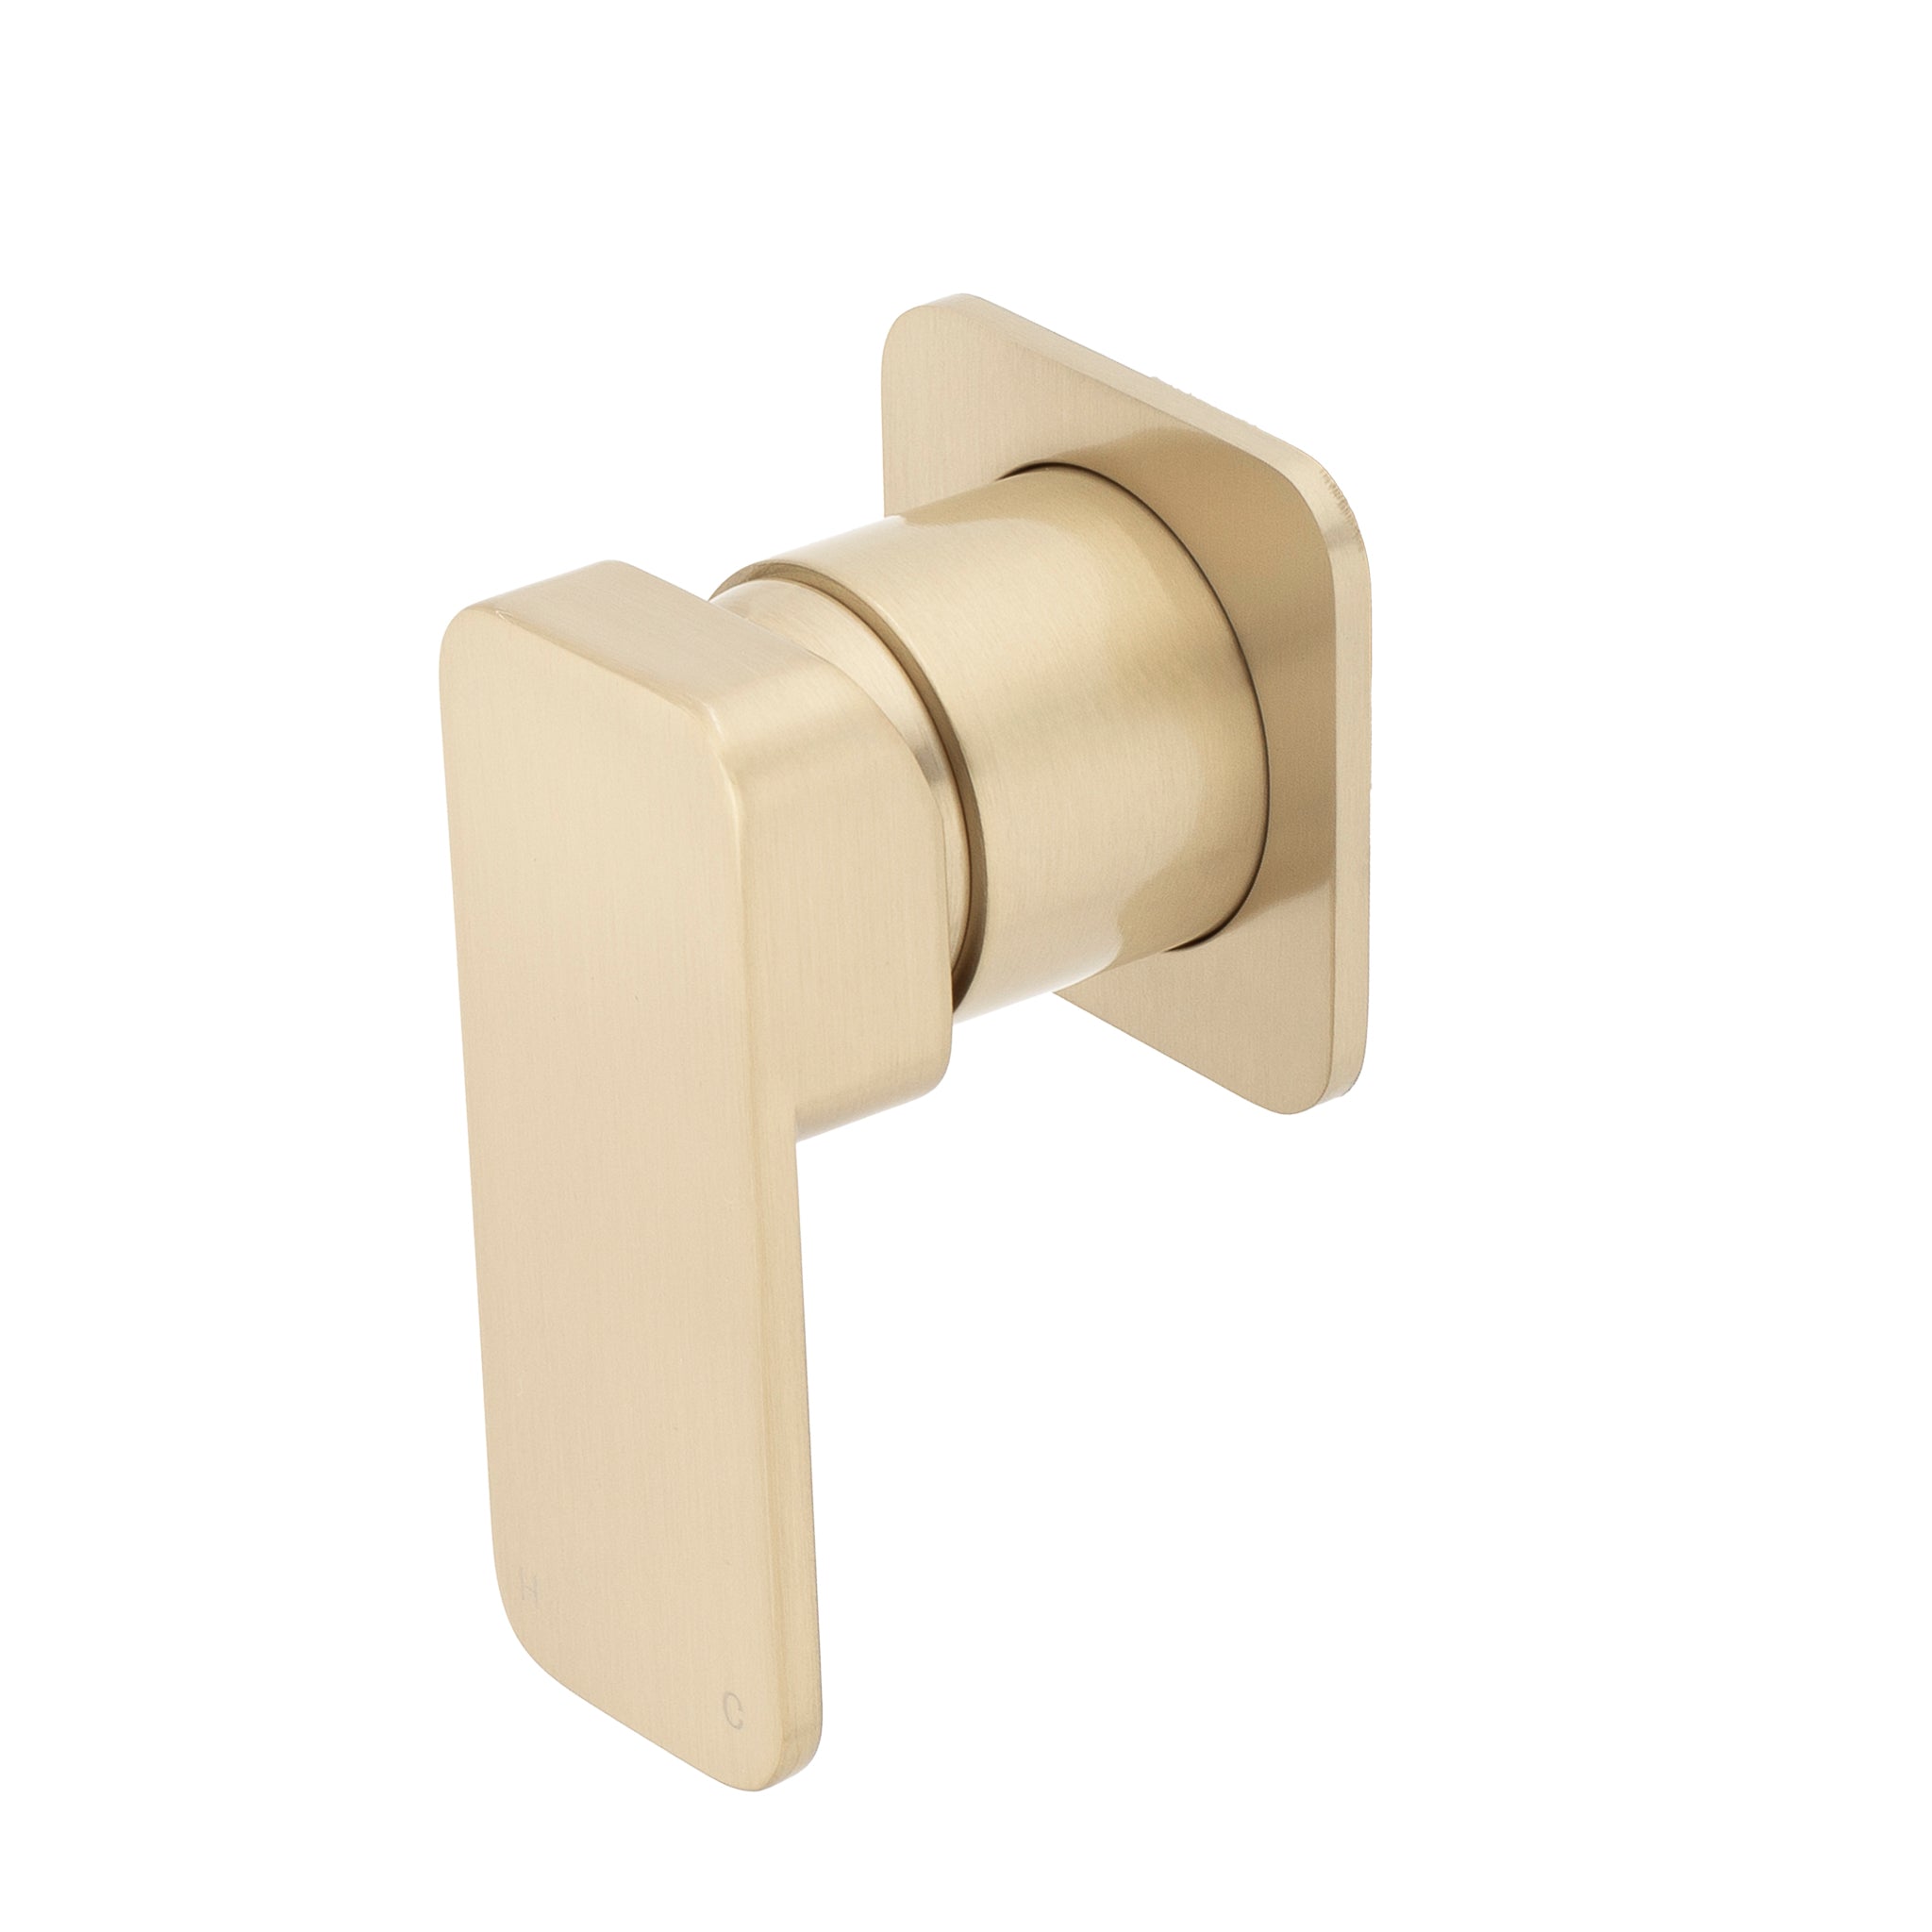 Kiki Shower/ Bath Wall Mixer with Square Plates, Brushed Brass (Gold)